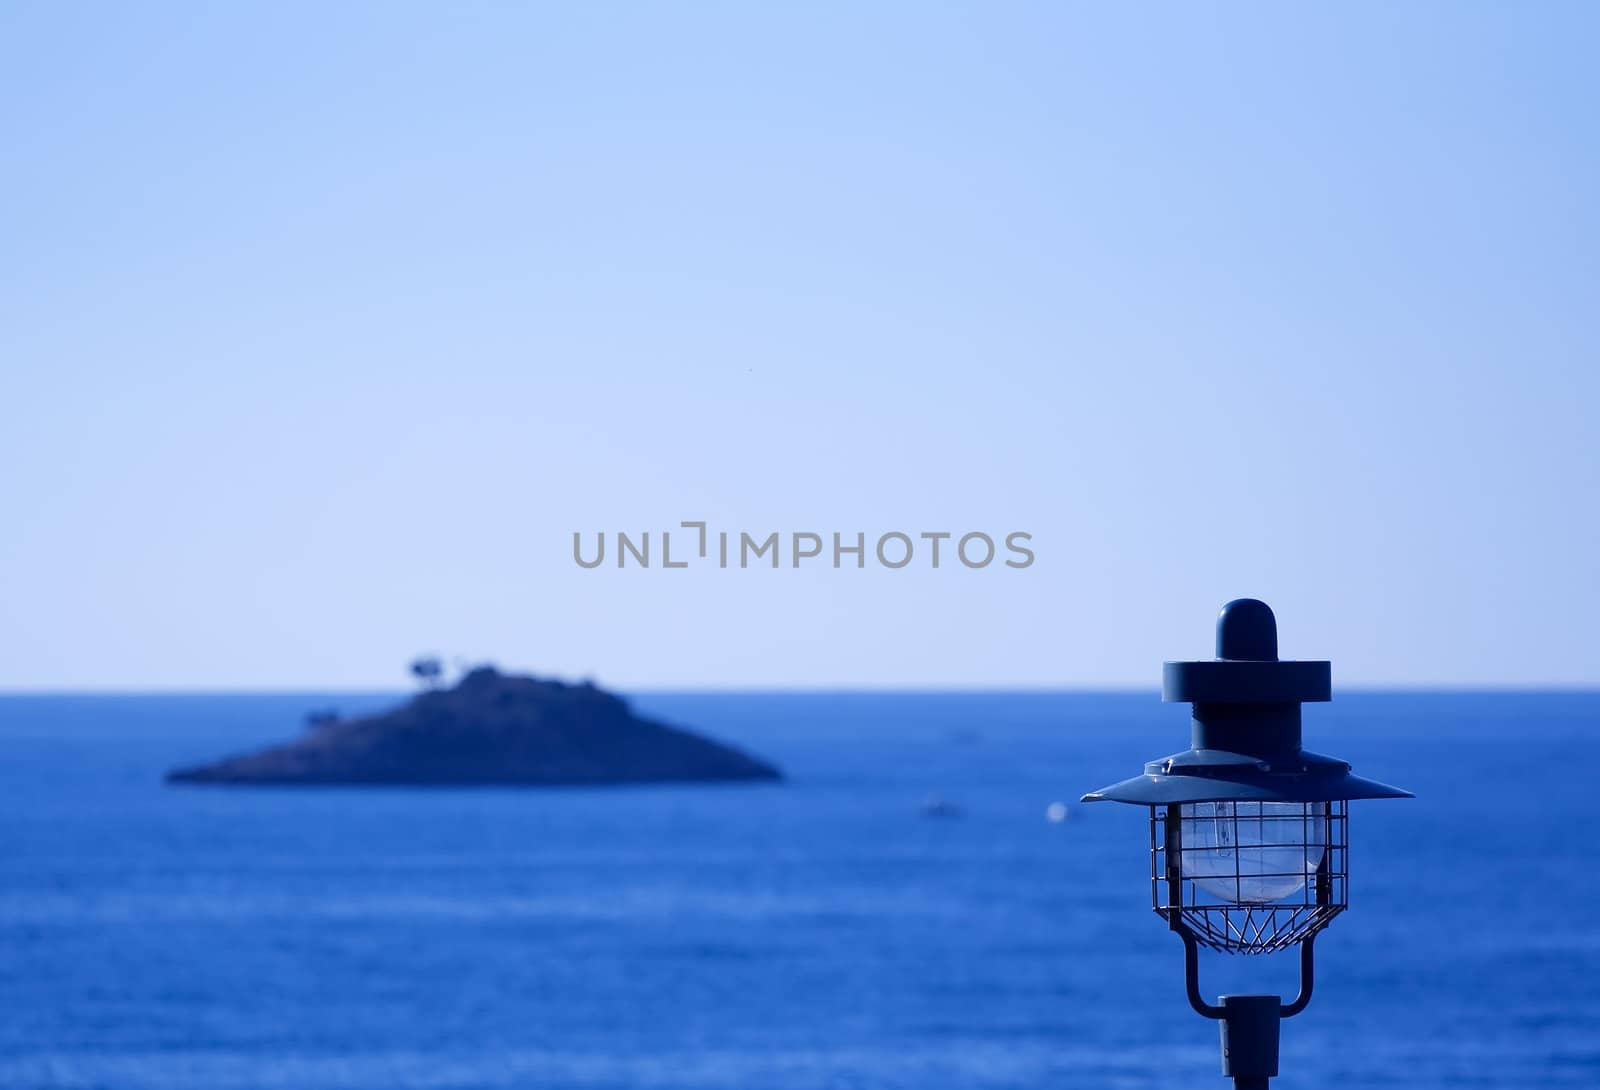 Street lamp in a small Mediterranean town wit a small island in background